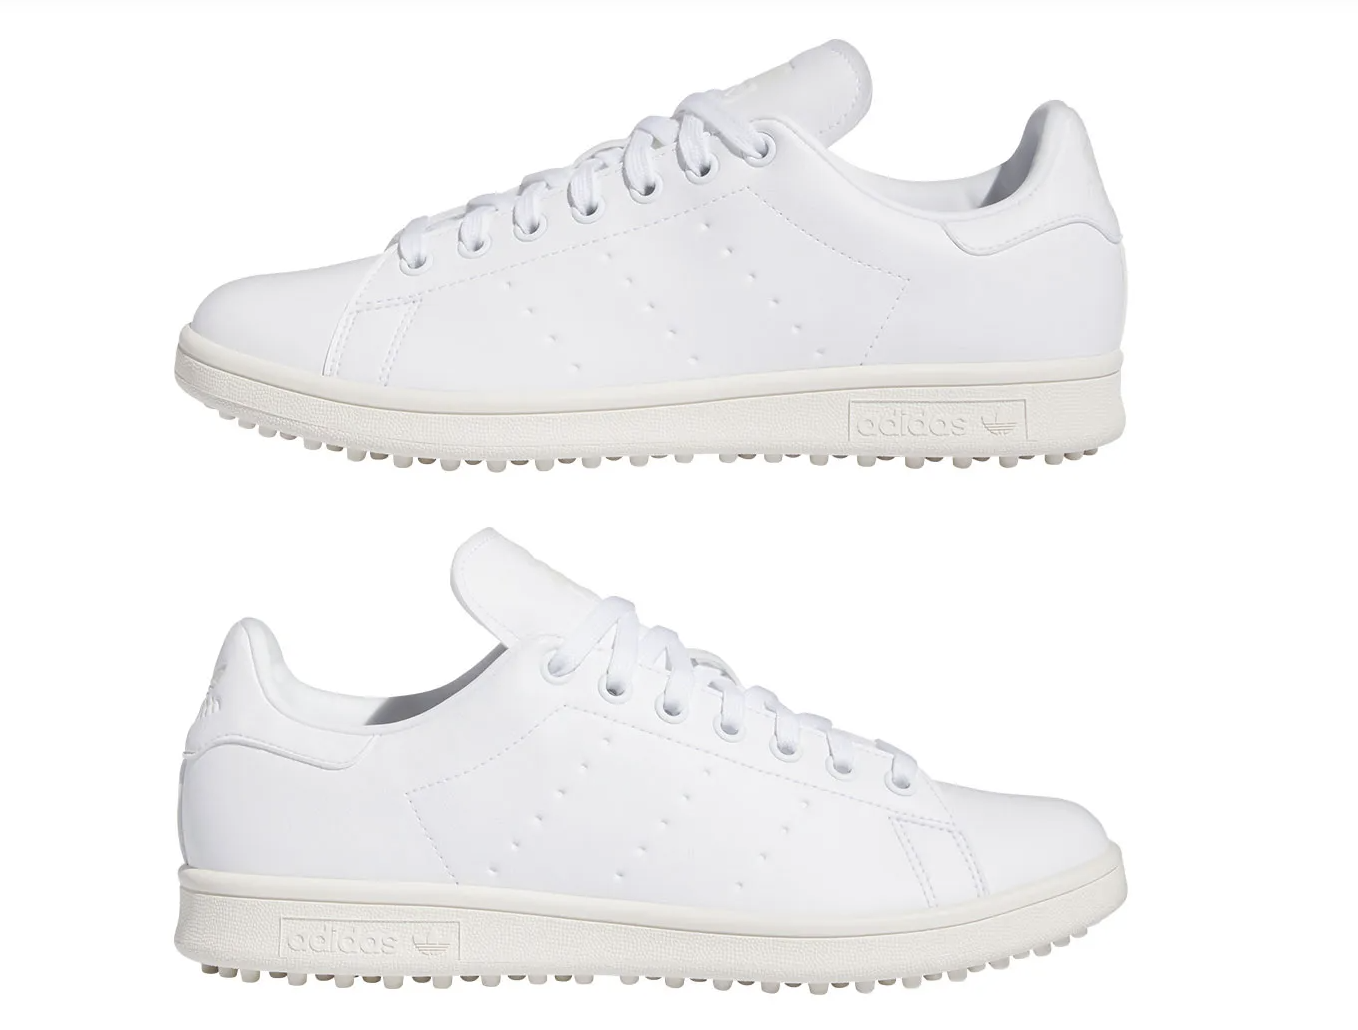 Adidas - Stan Smith Spikeless Golf Shoes